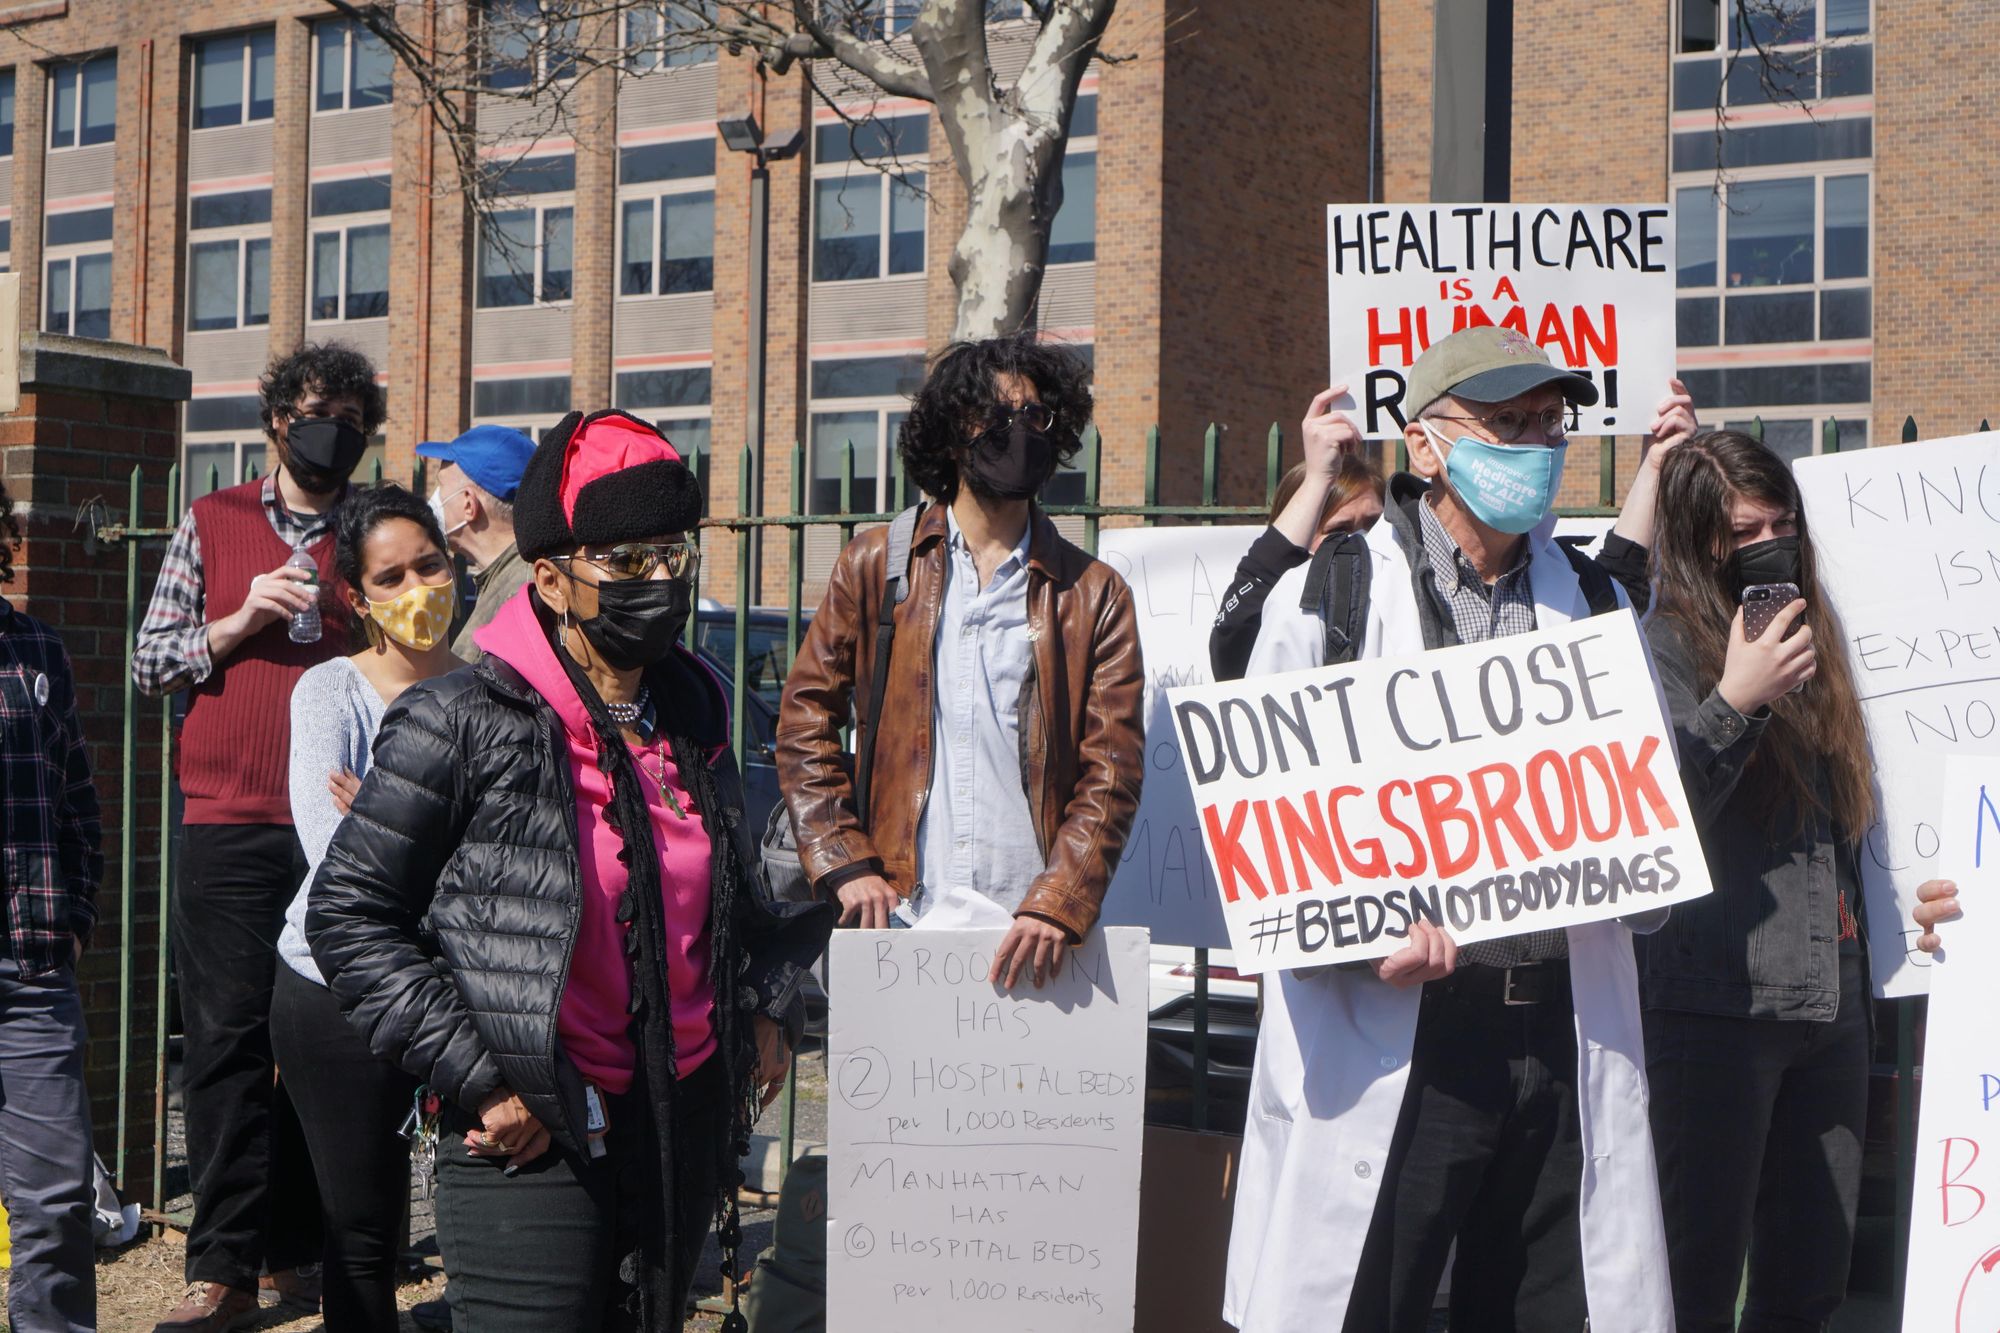 Protestors Call for Cancellation of Kingsbrook Hospital Consolidation